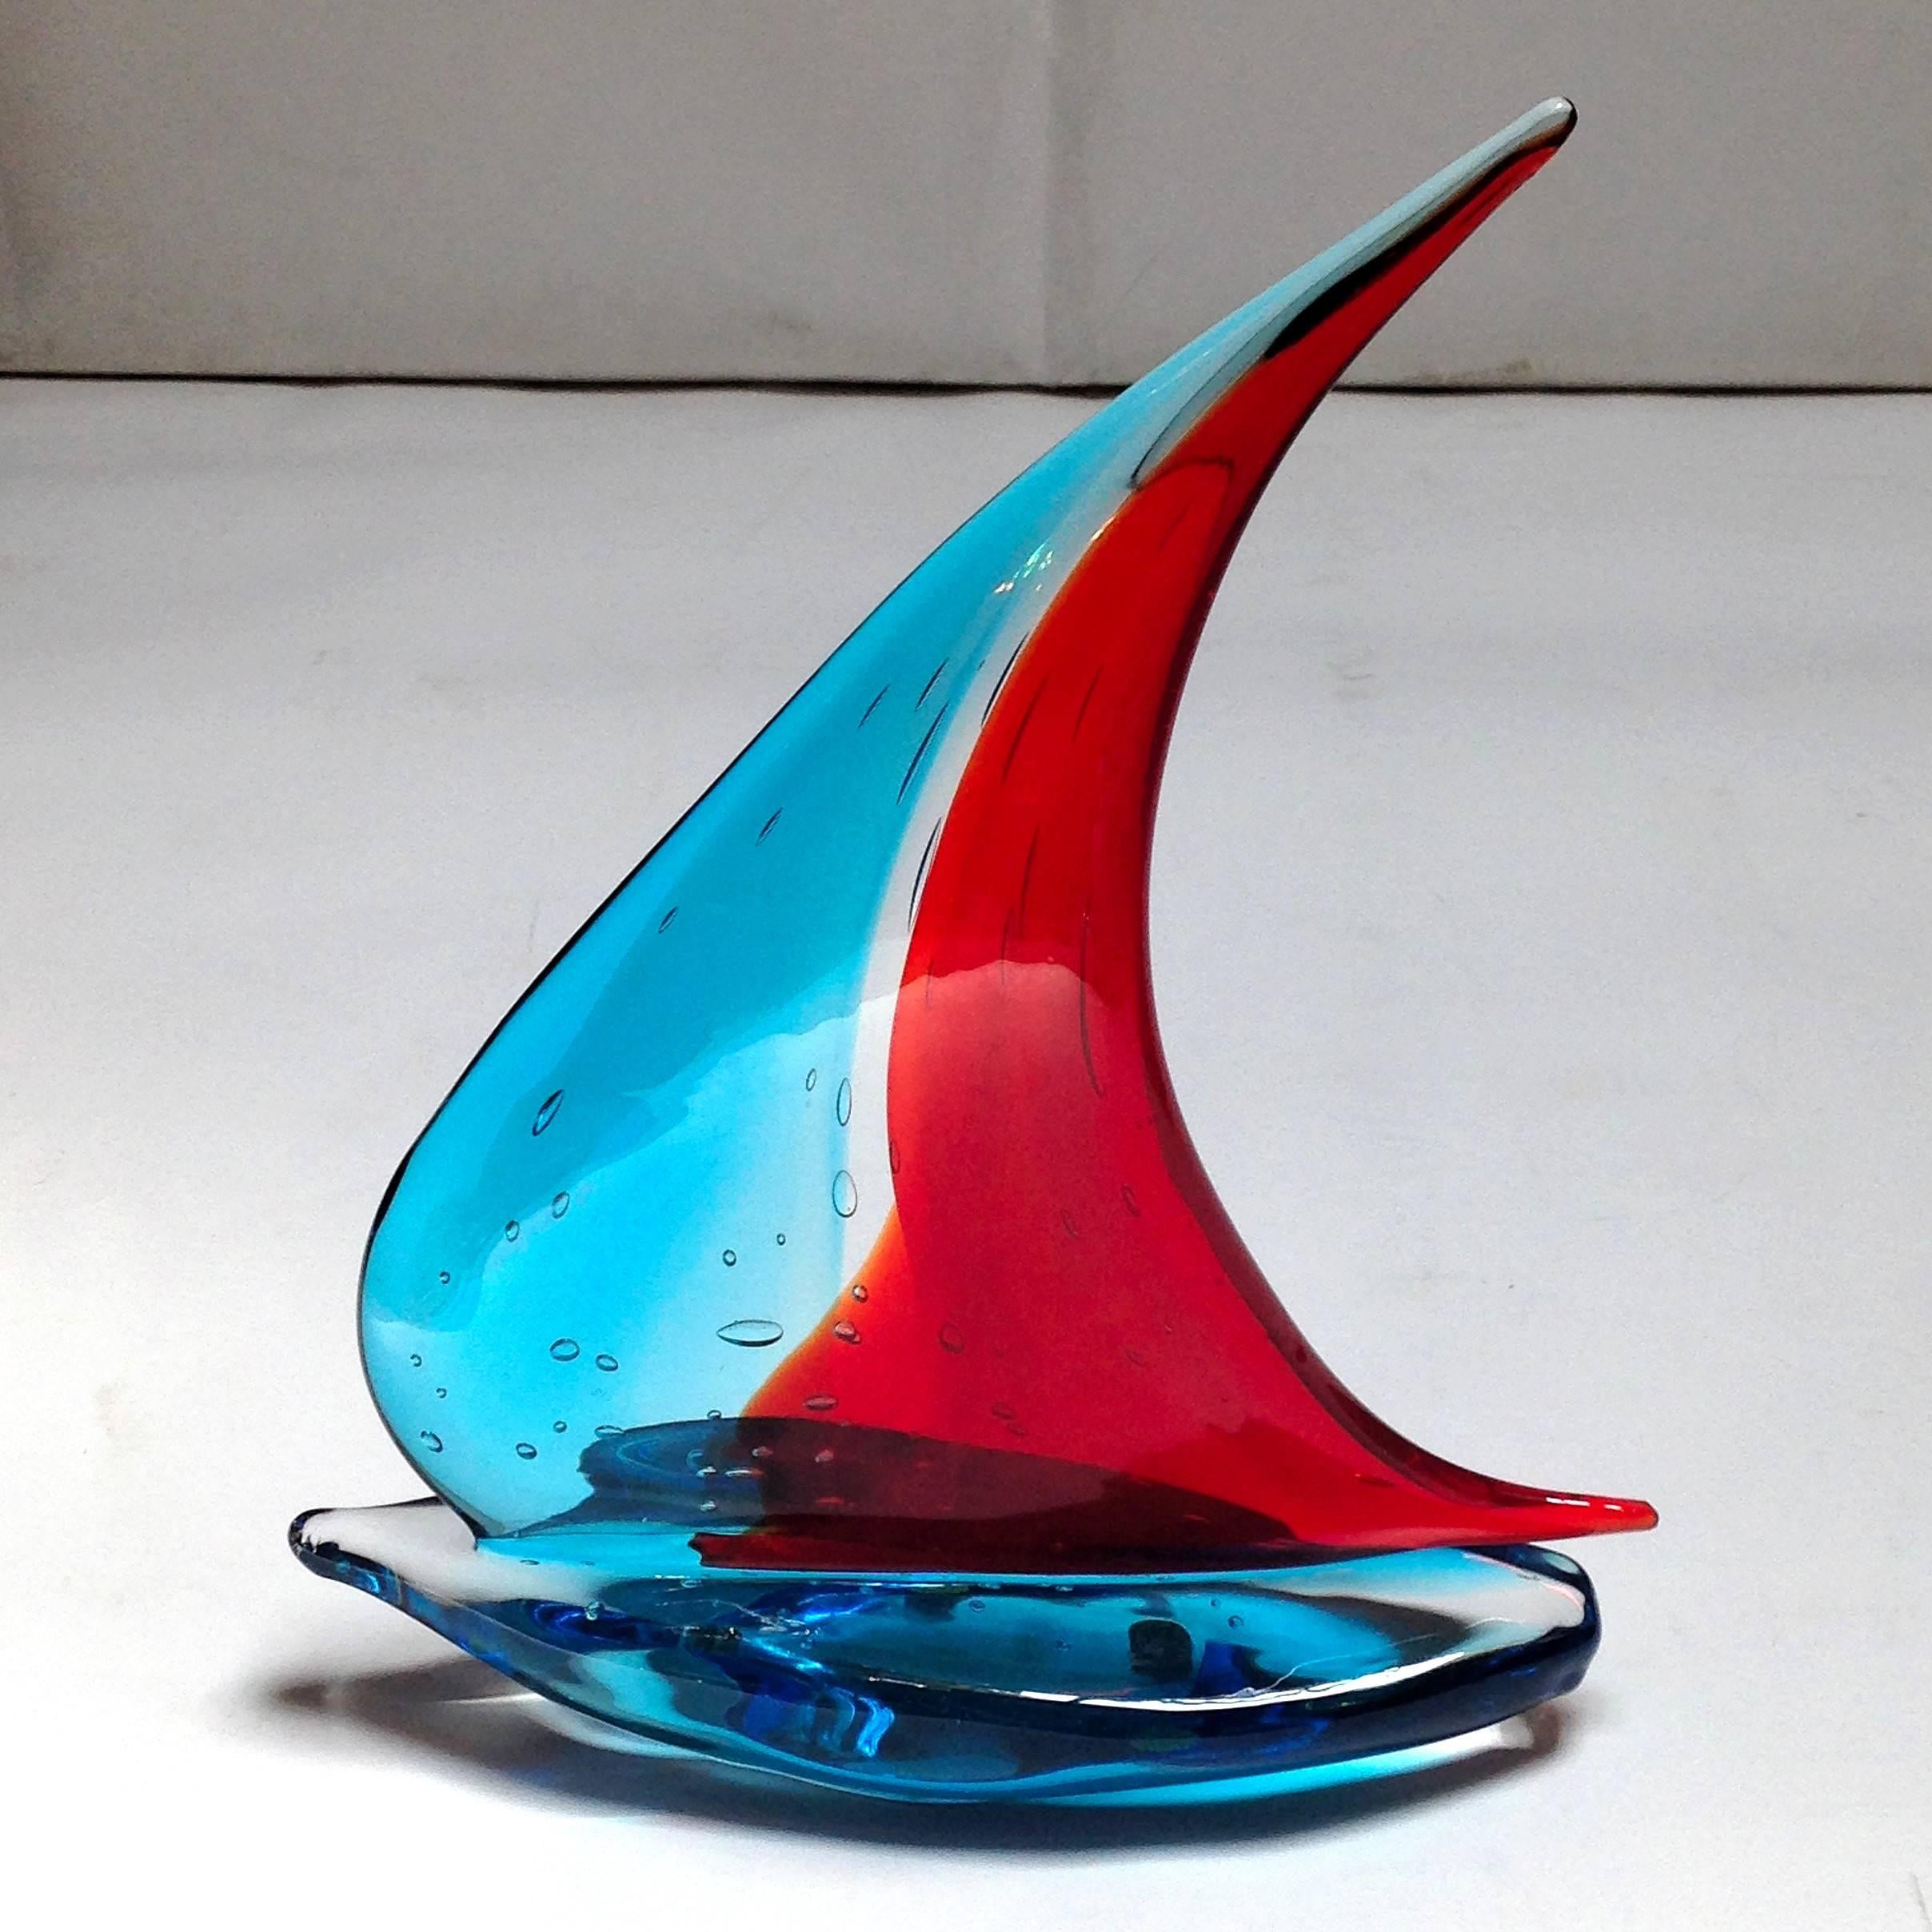 Vintage Italian single sailboat hand blown and crafted in blue and red Murano glass by Sergio Constantini
Signed on the base / Made in Italy in the 1960’s
Height: 13 inches / Width: 10 inches / Depth: 3 inches
1 in stock in Palm Springs currently ON